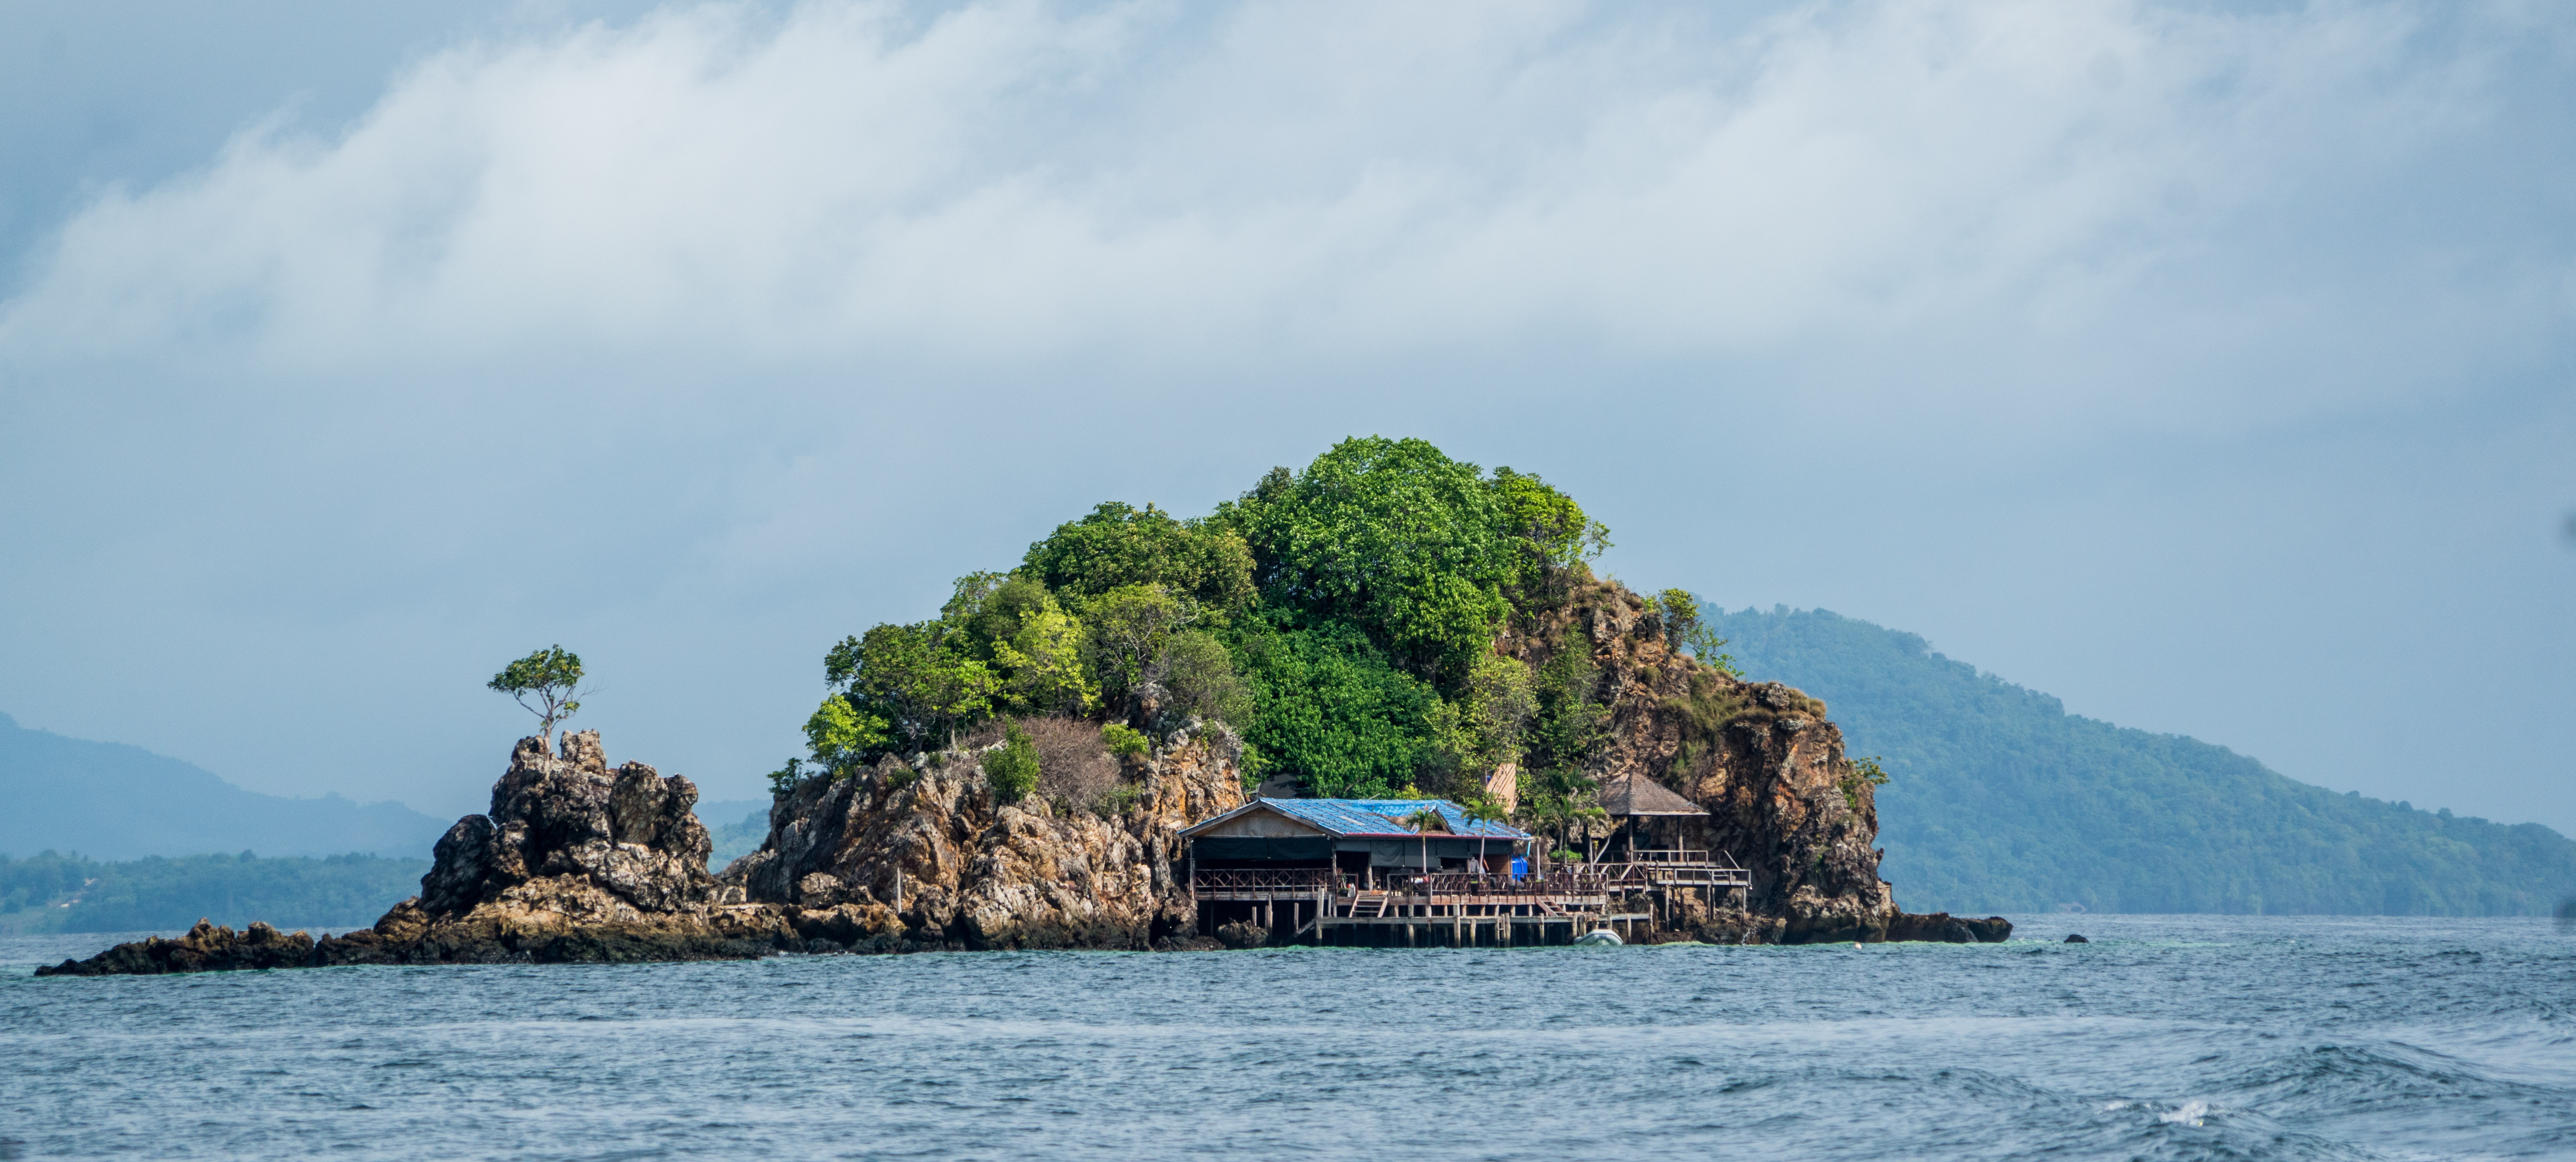 An island surrounded by the sea in Thailand